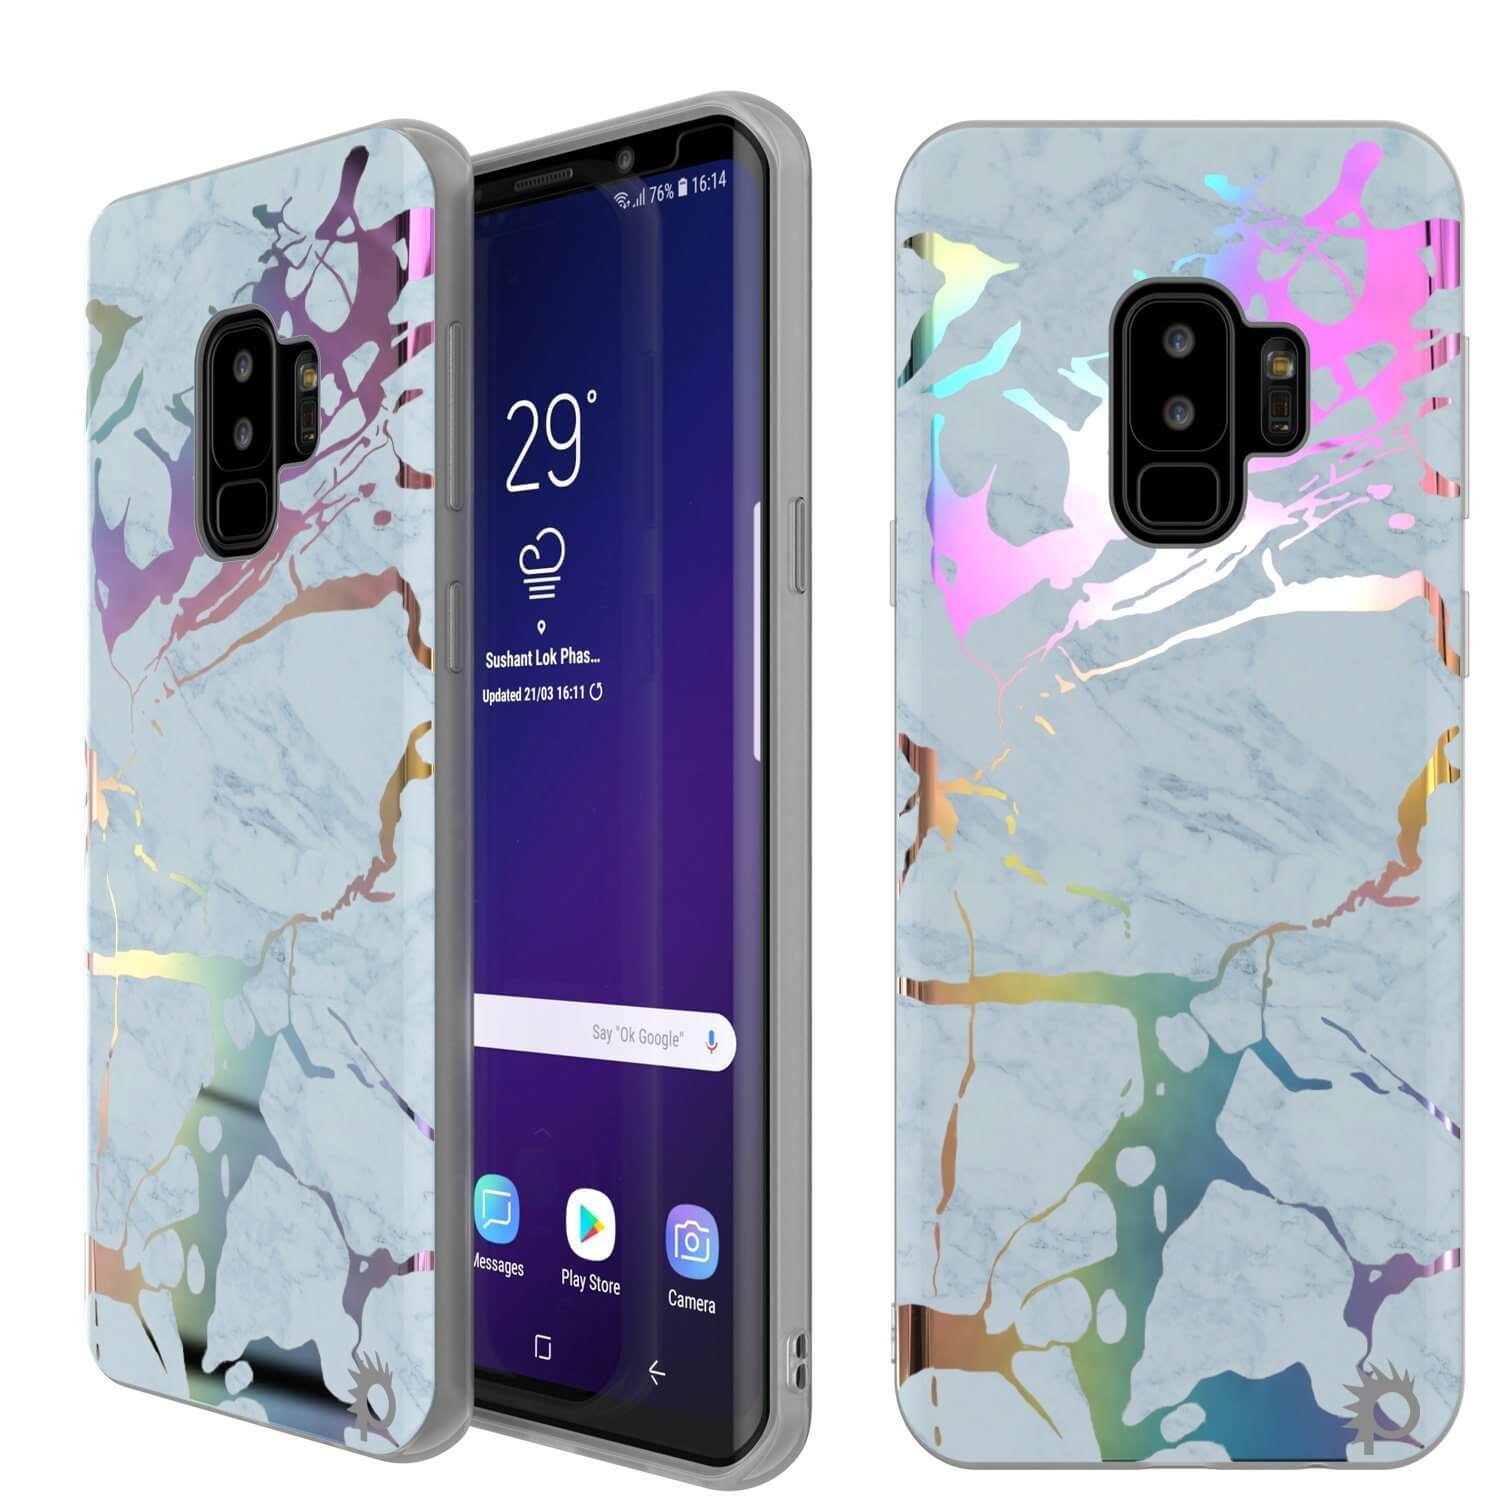 Punkcase Galaxy S9+ Marble Case, Protective Full Body Cover W/PunkShield Screen Protector (Blue Marmo)